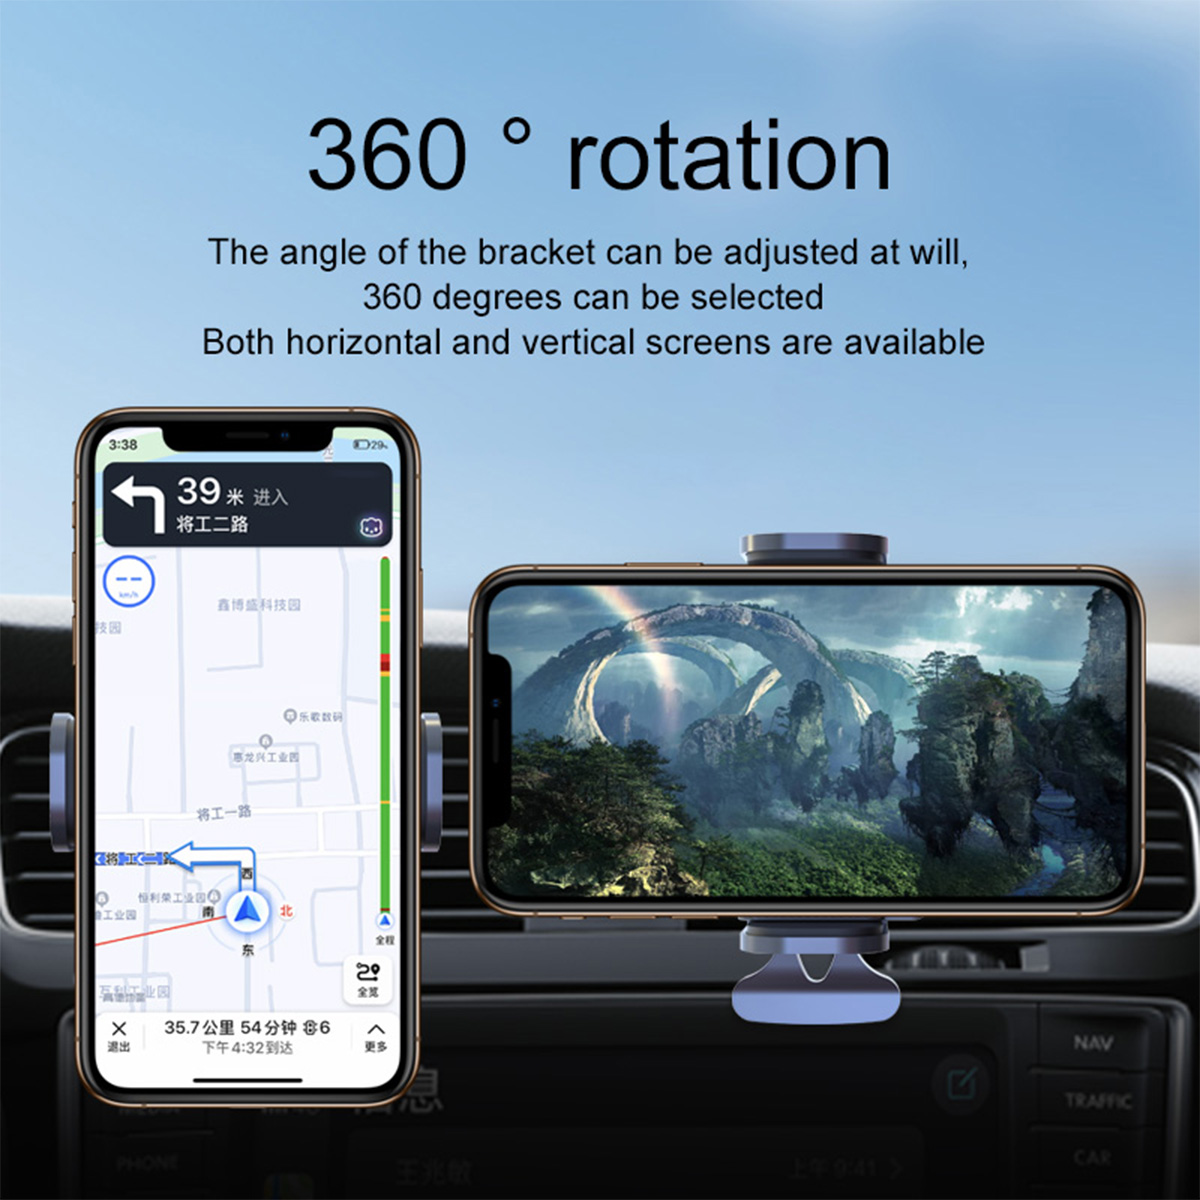 Bakeey H30 Car Solar Powered Auto-Induction Vehicle Bracket Mobile Phone Holder Stand for POCO X3 F3 4.5-6.9 inch Devices